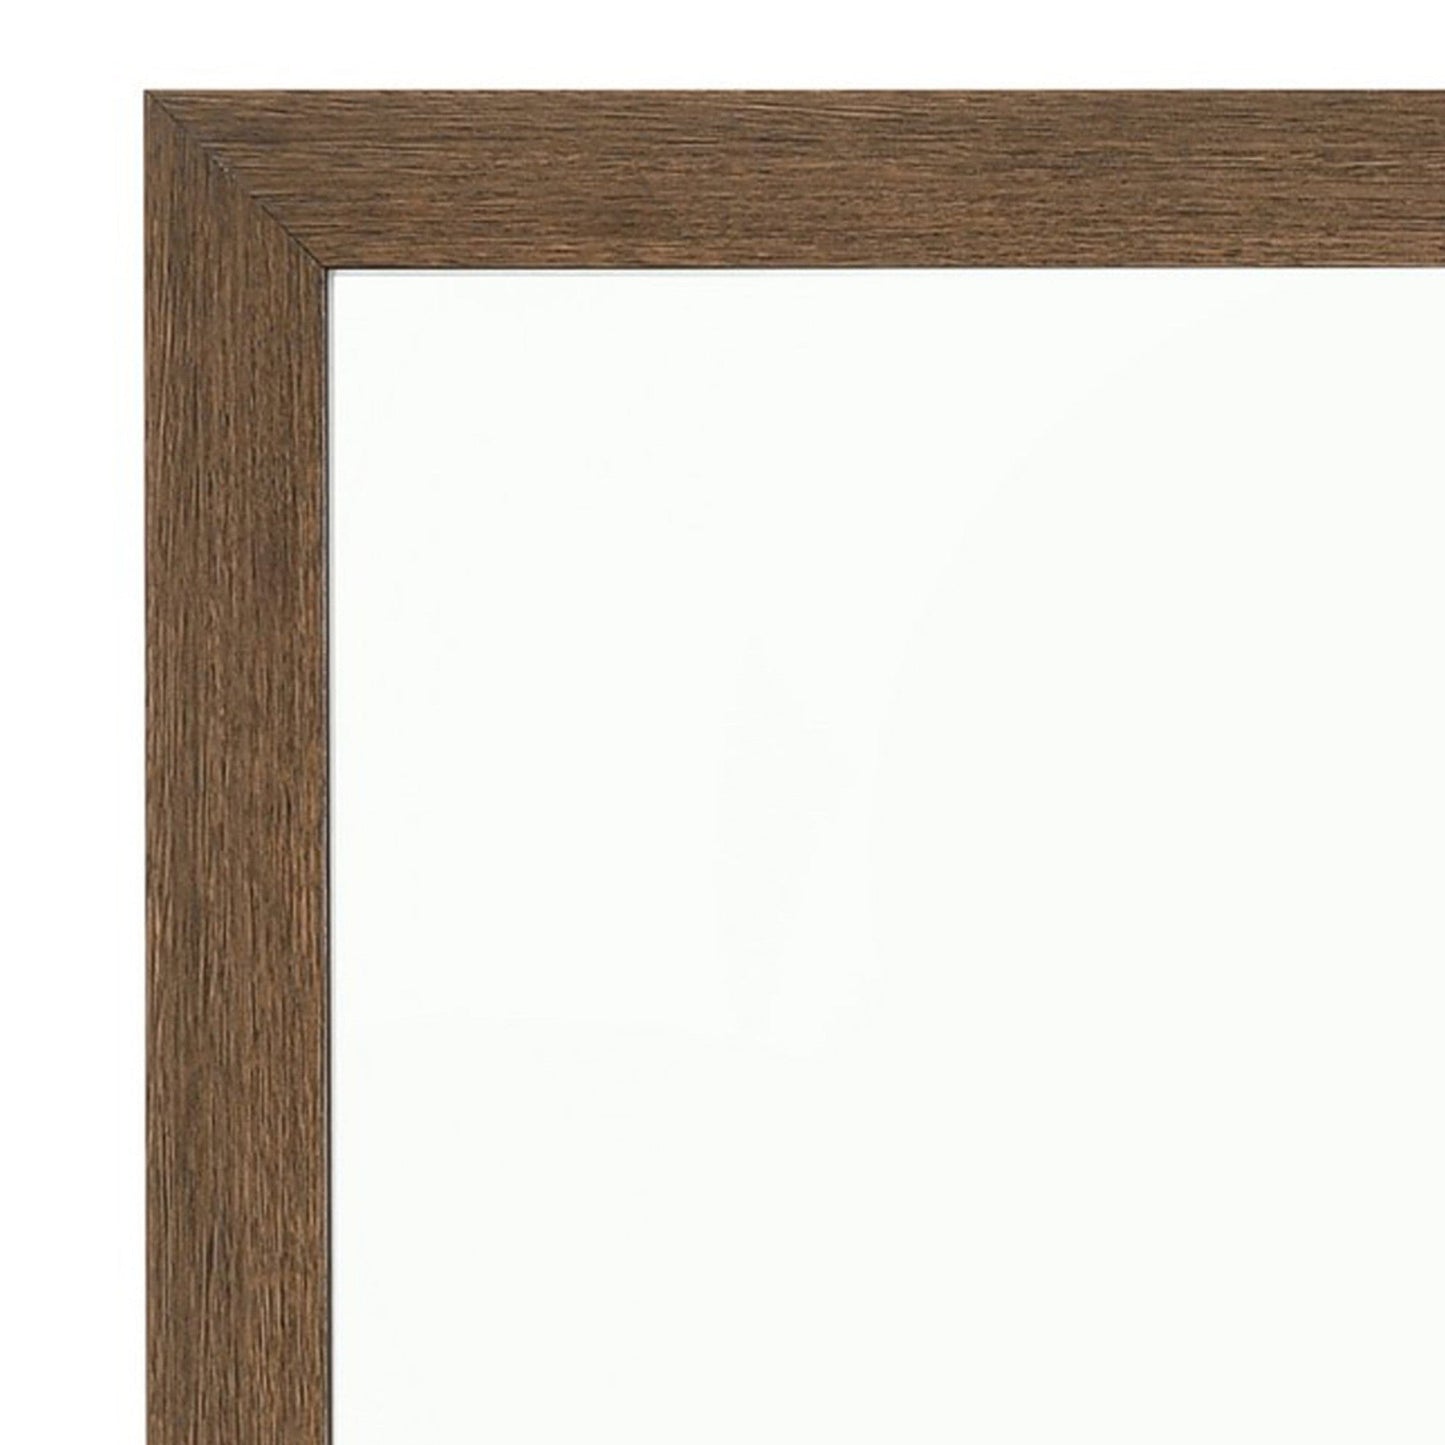 Benzara 40" Brown Square Transitional Style Wooden Frame Mirror With Grain Details